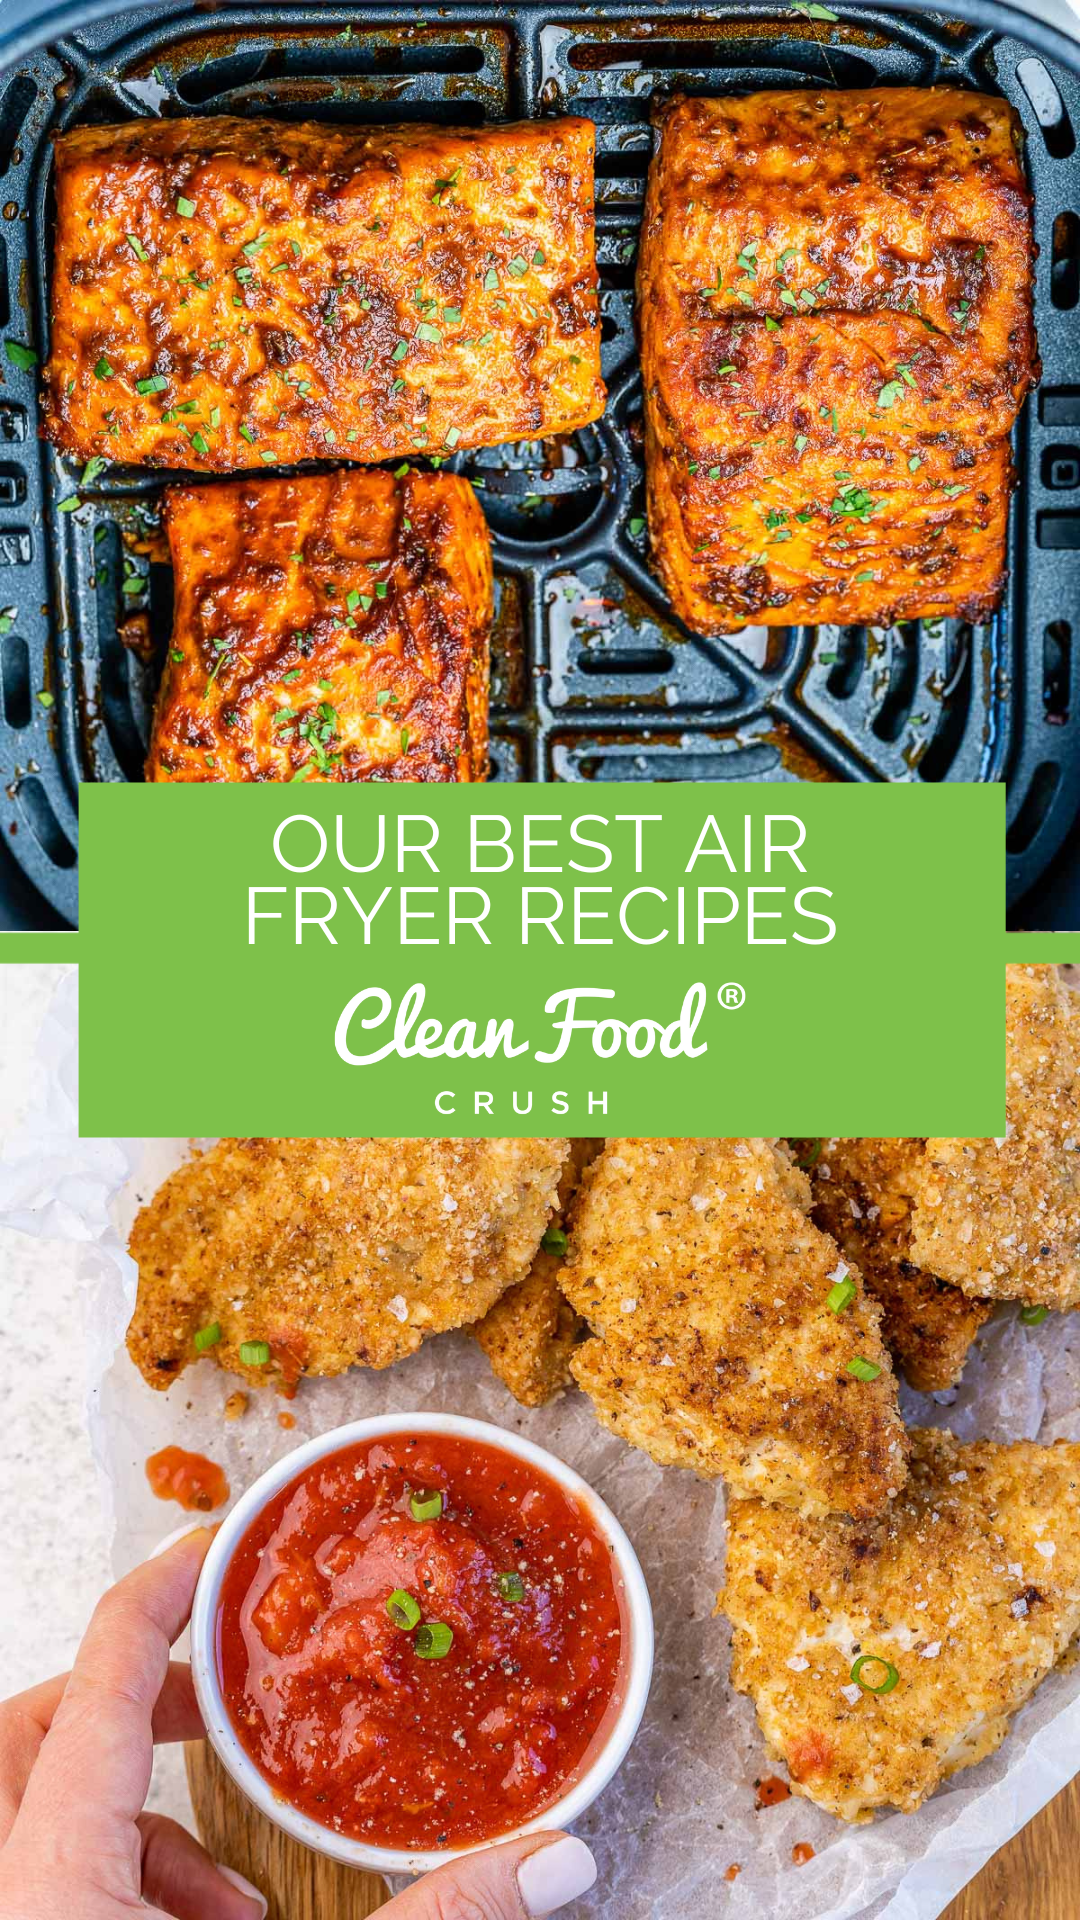 Where To Go For The Best Air Fryer Recipes